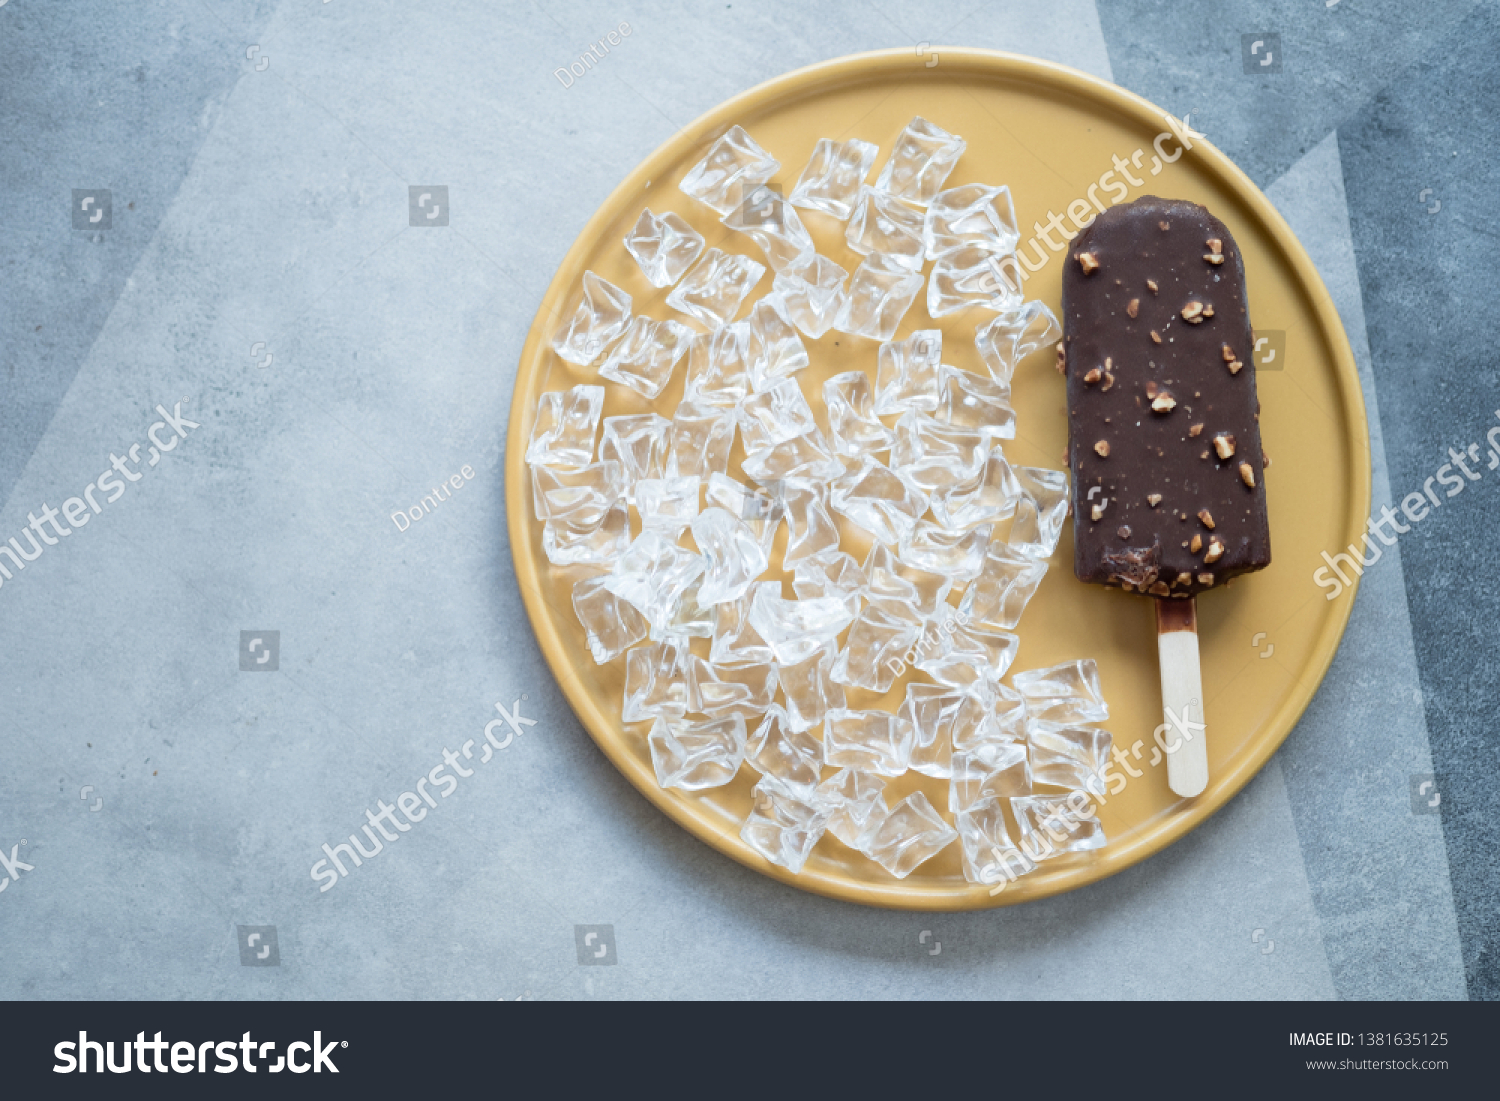 Download Close Chocolate Ice Cream Bar Nuts Food And Drink Stock Image 1381635125 PSD Mockup Templates